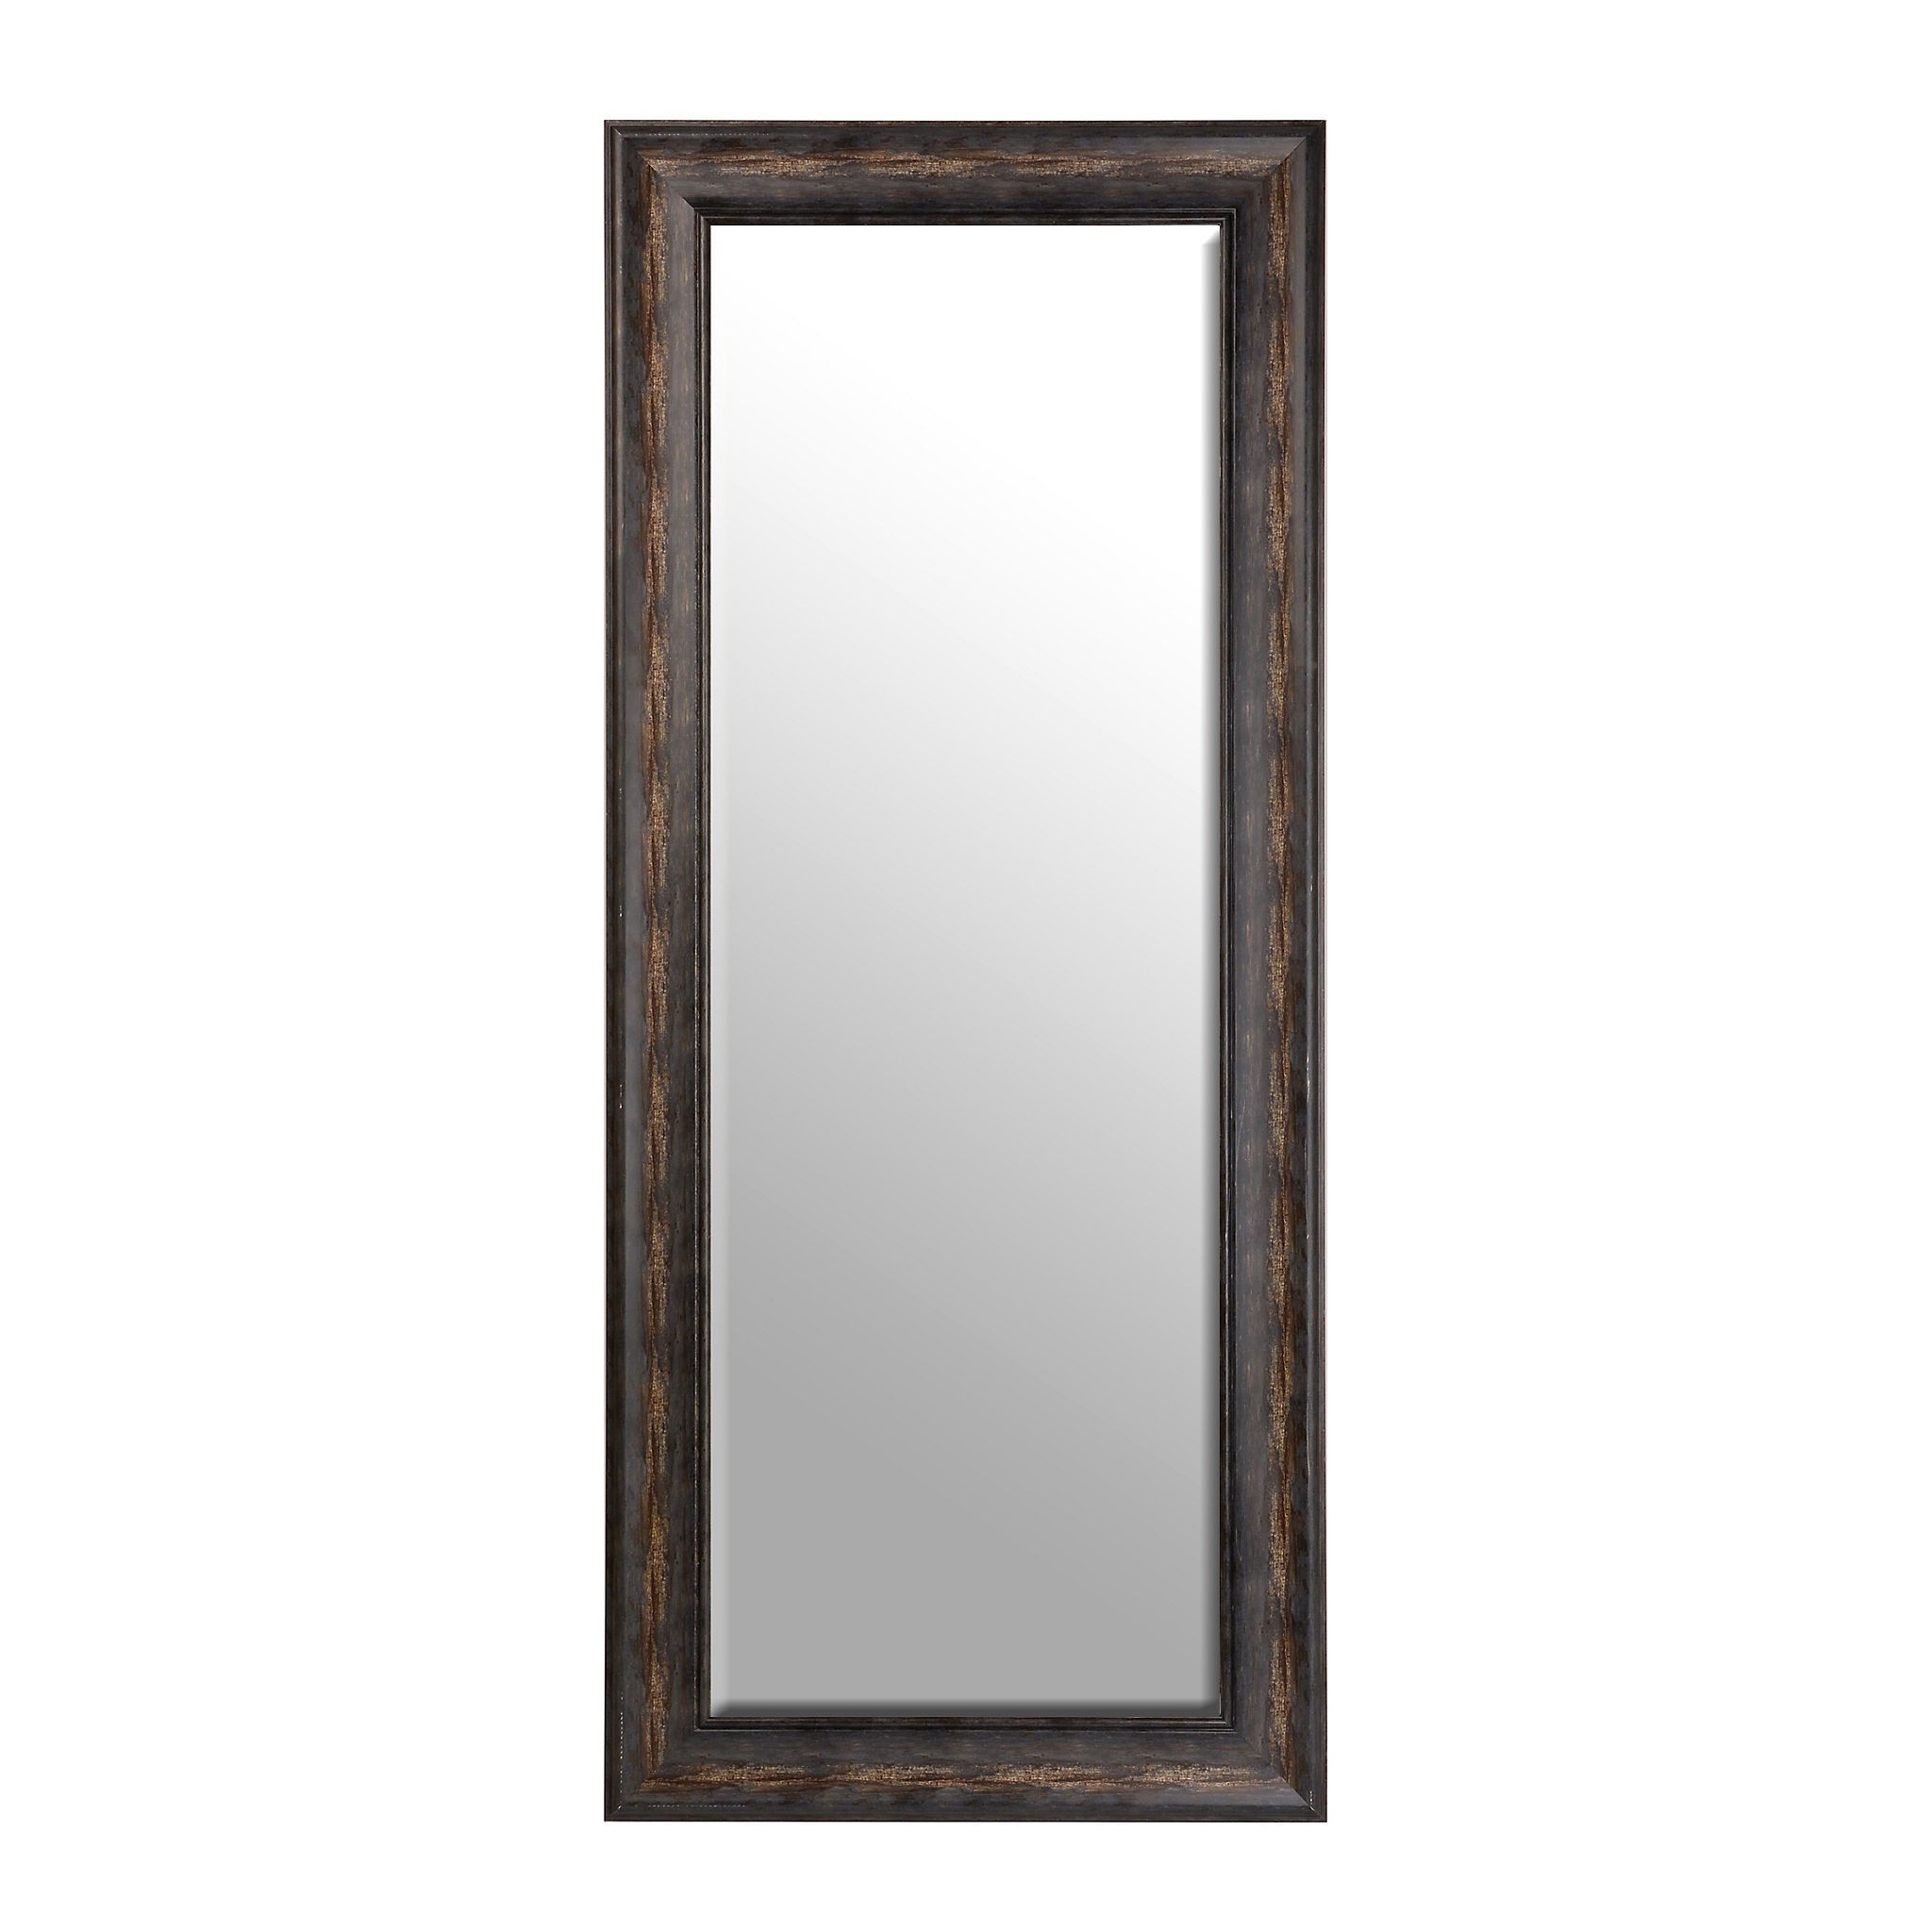 Distressed Black Framed Mirror, 33x79 In | How To Clean Mirrors Within Distressed Dark Bronze Wall Mirrors (View 10 of 15)